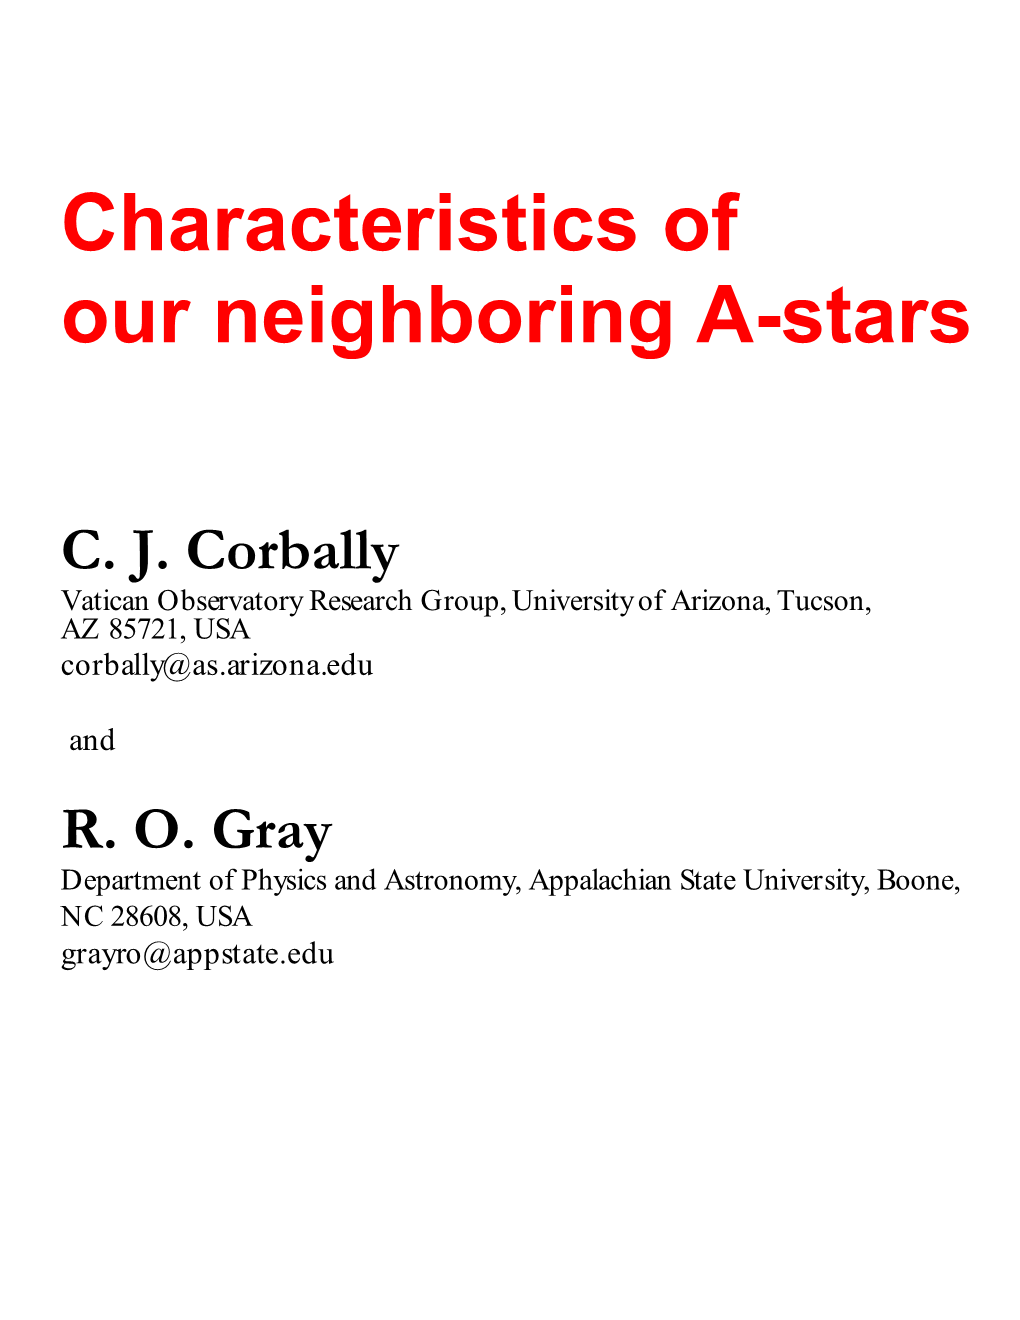 IP1: CORBALLY, GRAY: Characteristics of Our Neighboring A-Stars